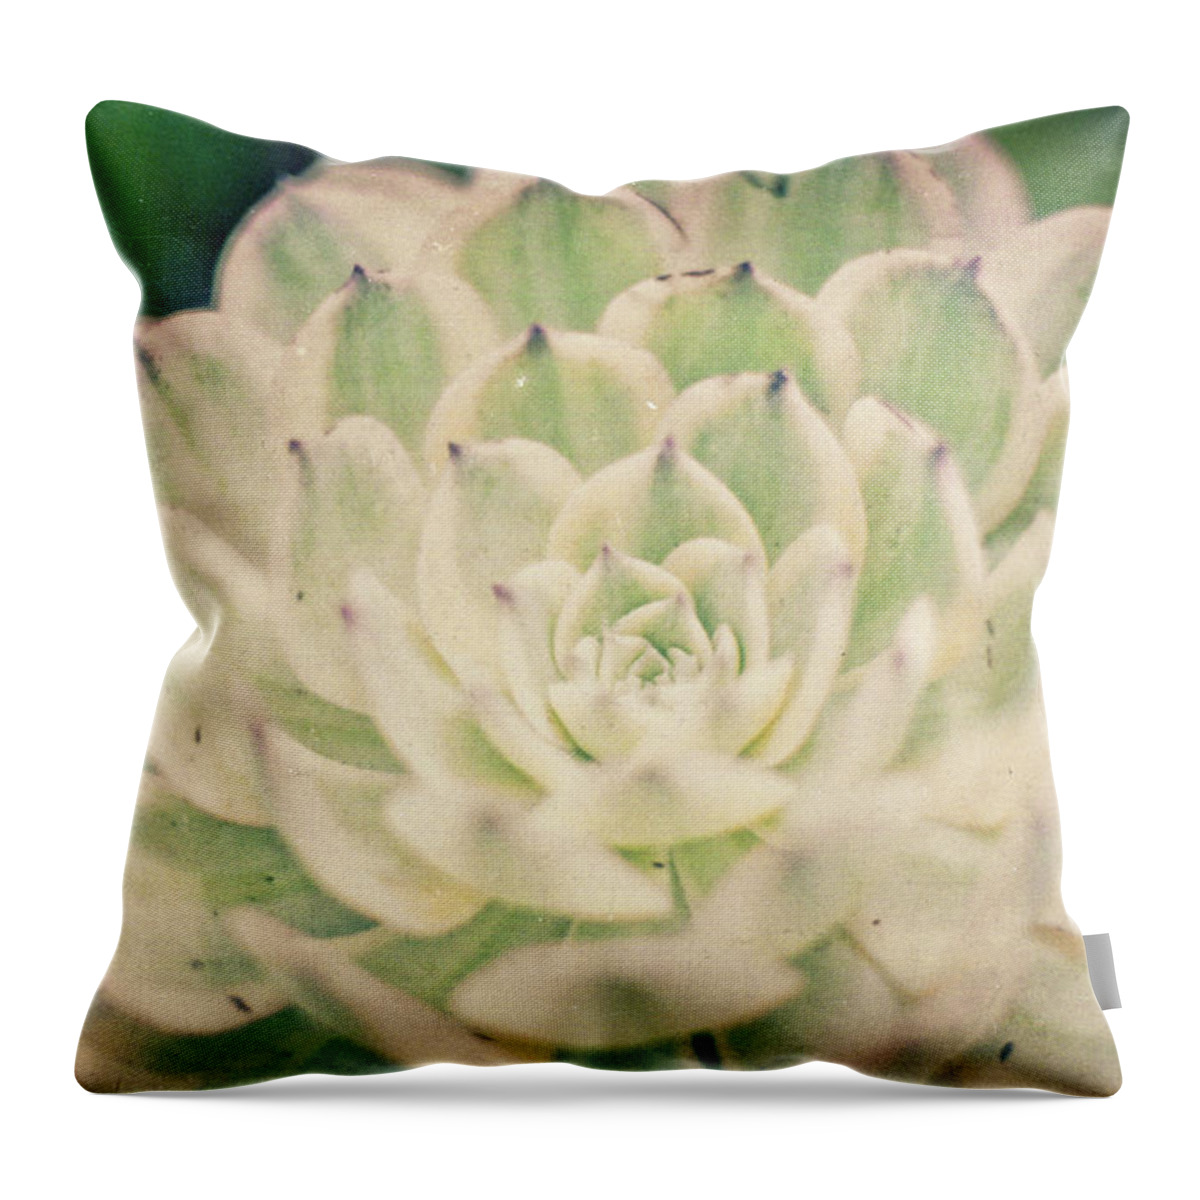 Garden Throw Pillow featuring the photograph Natural Geometry by Ana V Ramirez